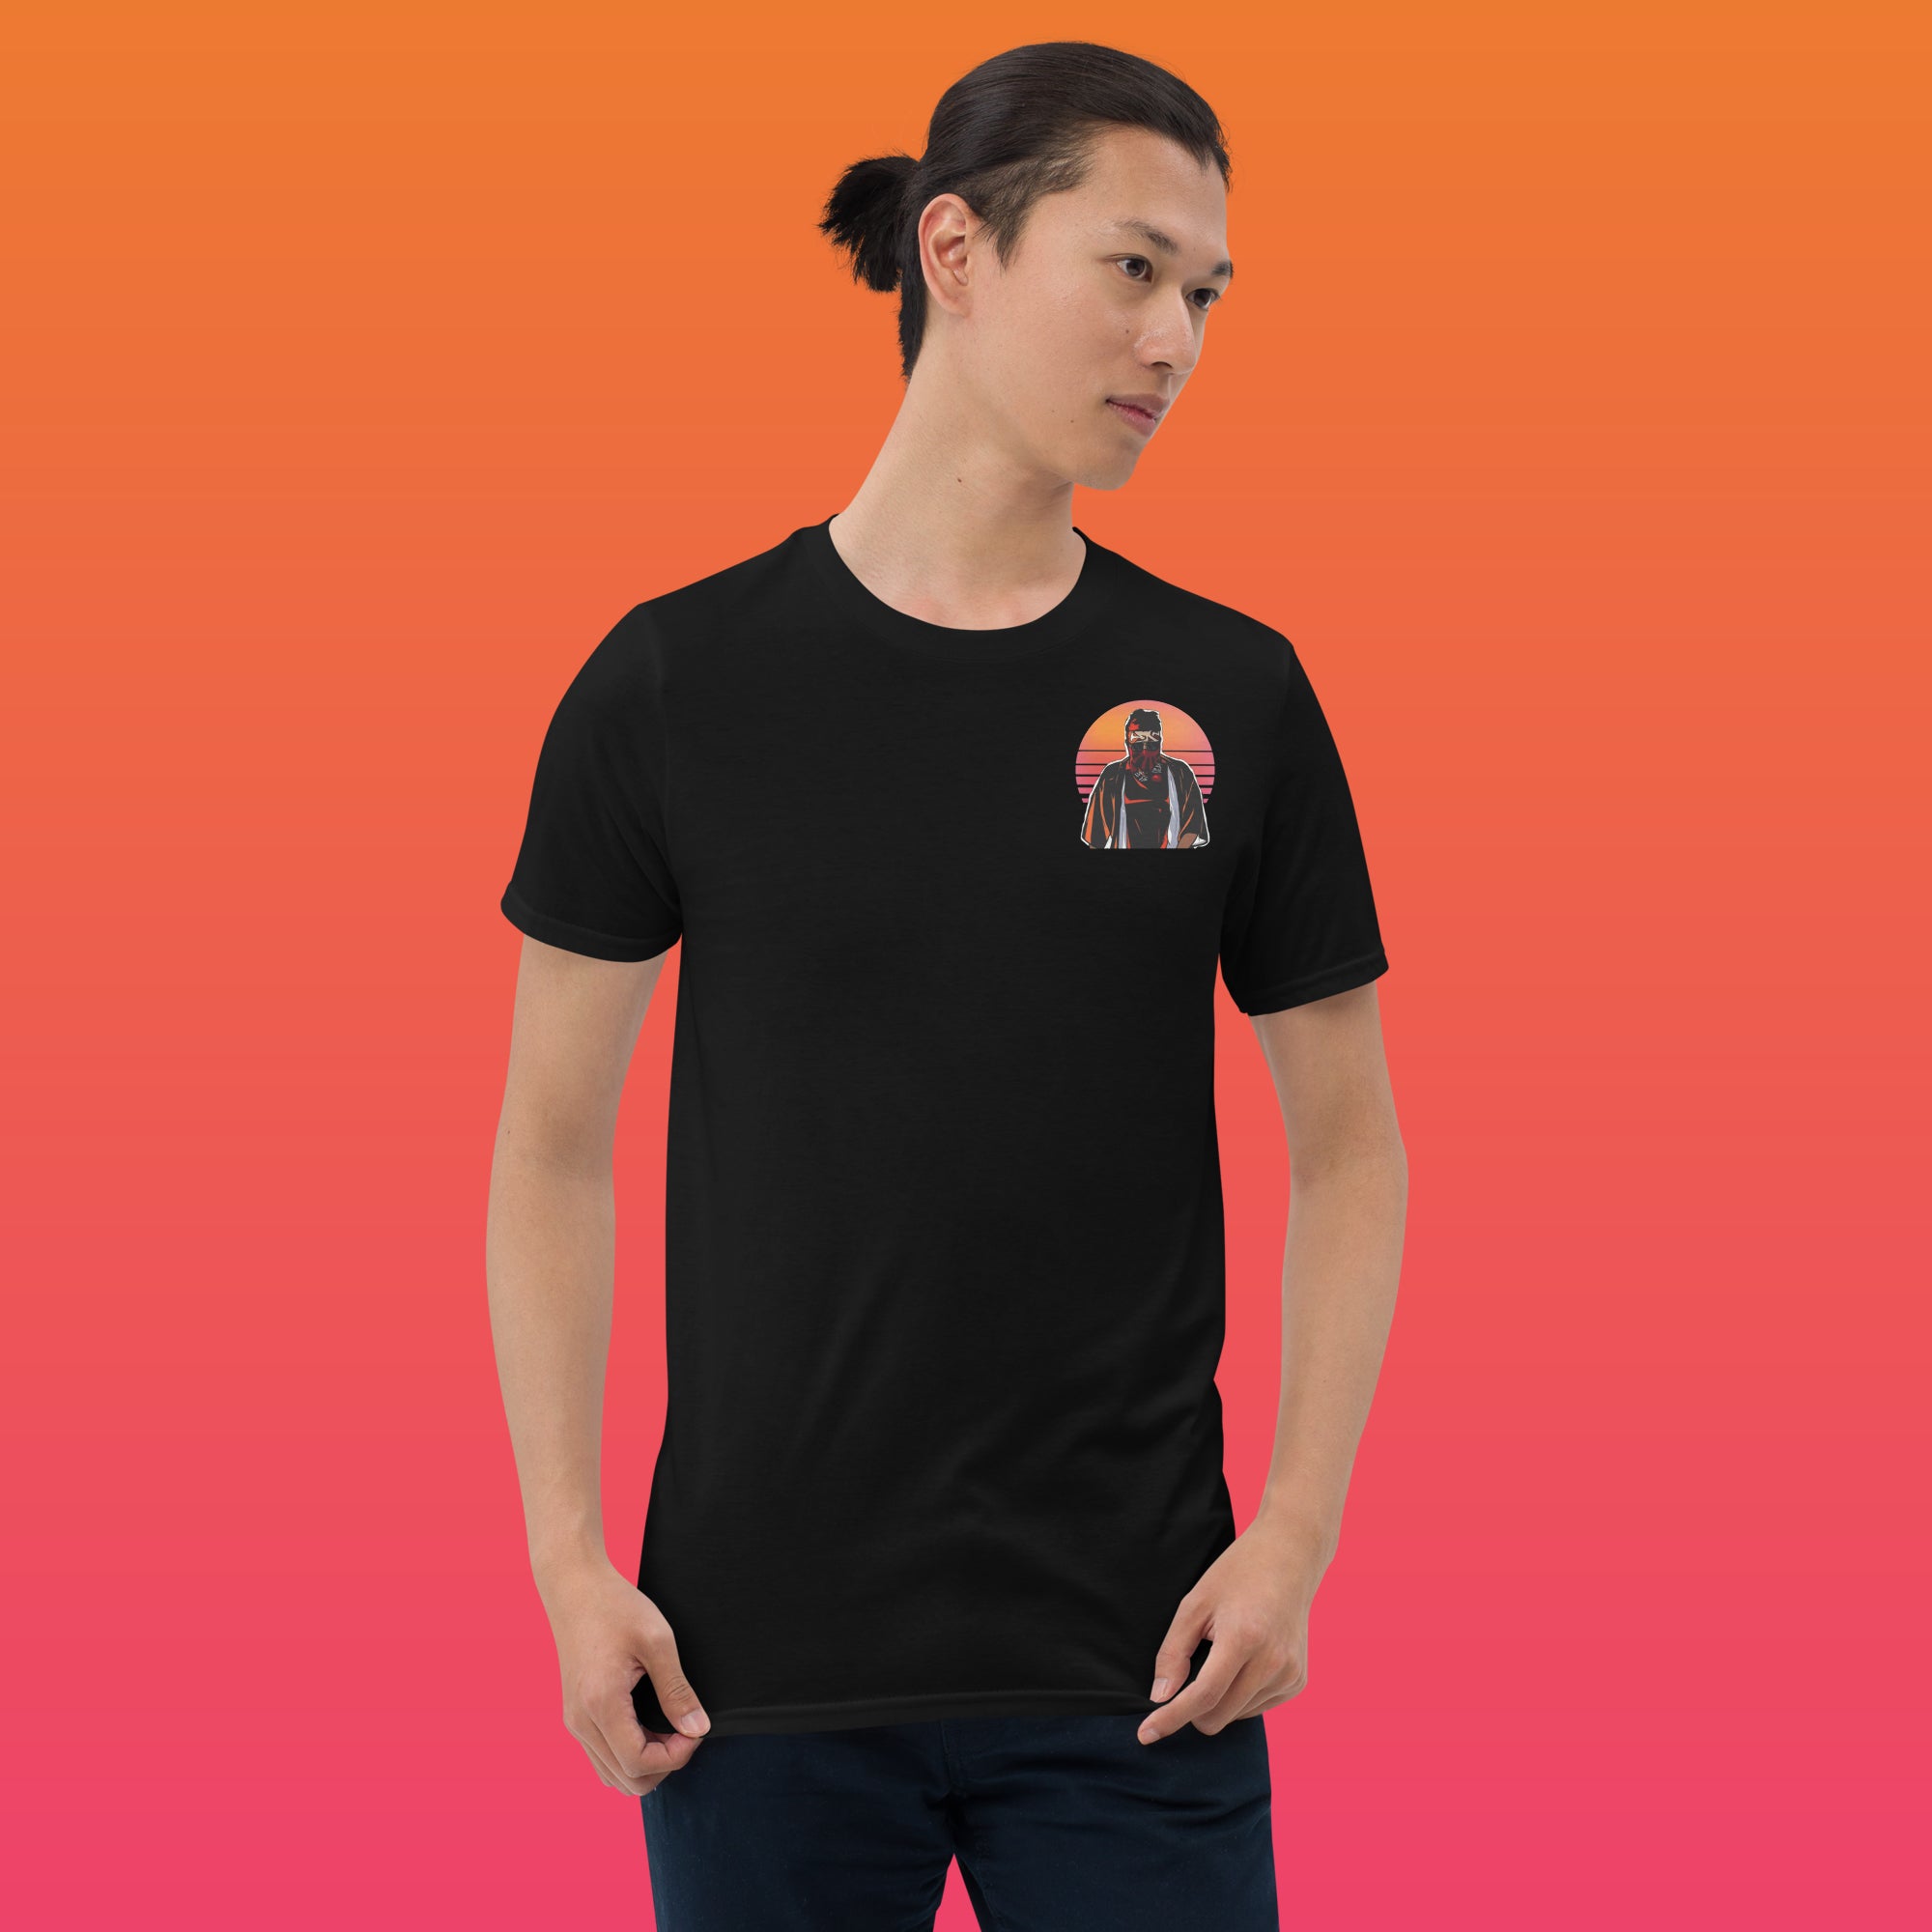 This Short-Sleeve Unisex T-Shirt from Mazadu House Dj is perfect for showing your support for a great cause. By buying the shirt, 80% of the proceeds will be donated to Mazadu and an additional 10% will be donated to the PLUR cause. Show your commitment to  Rave Culture with Peace, Love, Unity, and Respect with this stylish t-shirt.